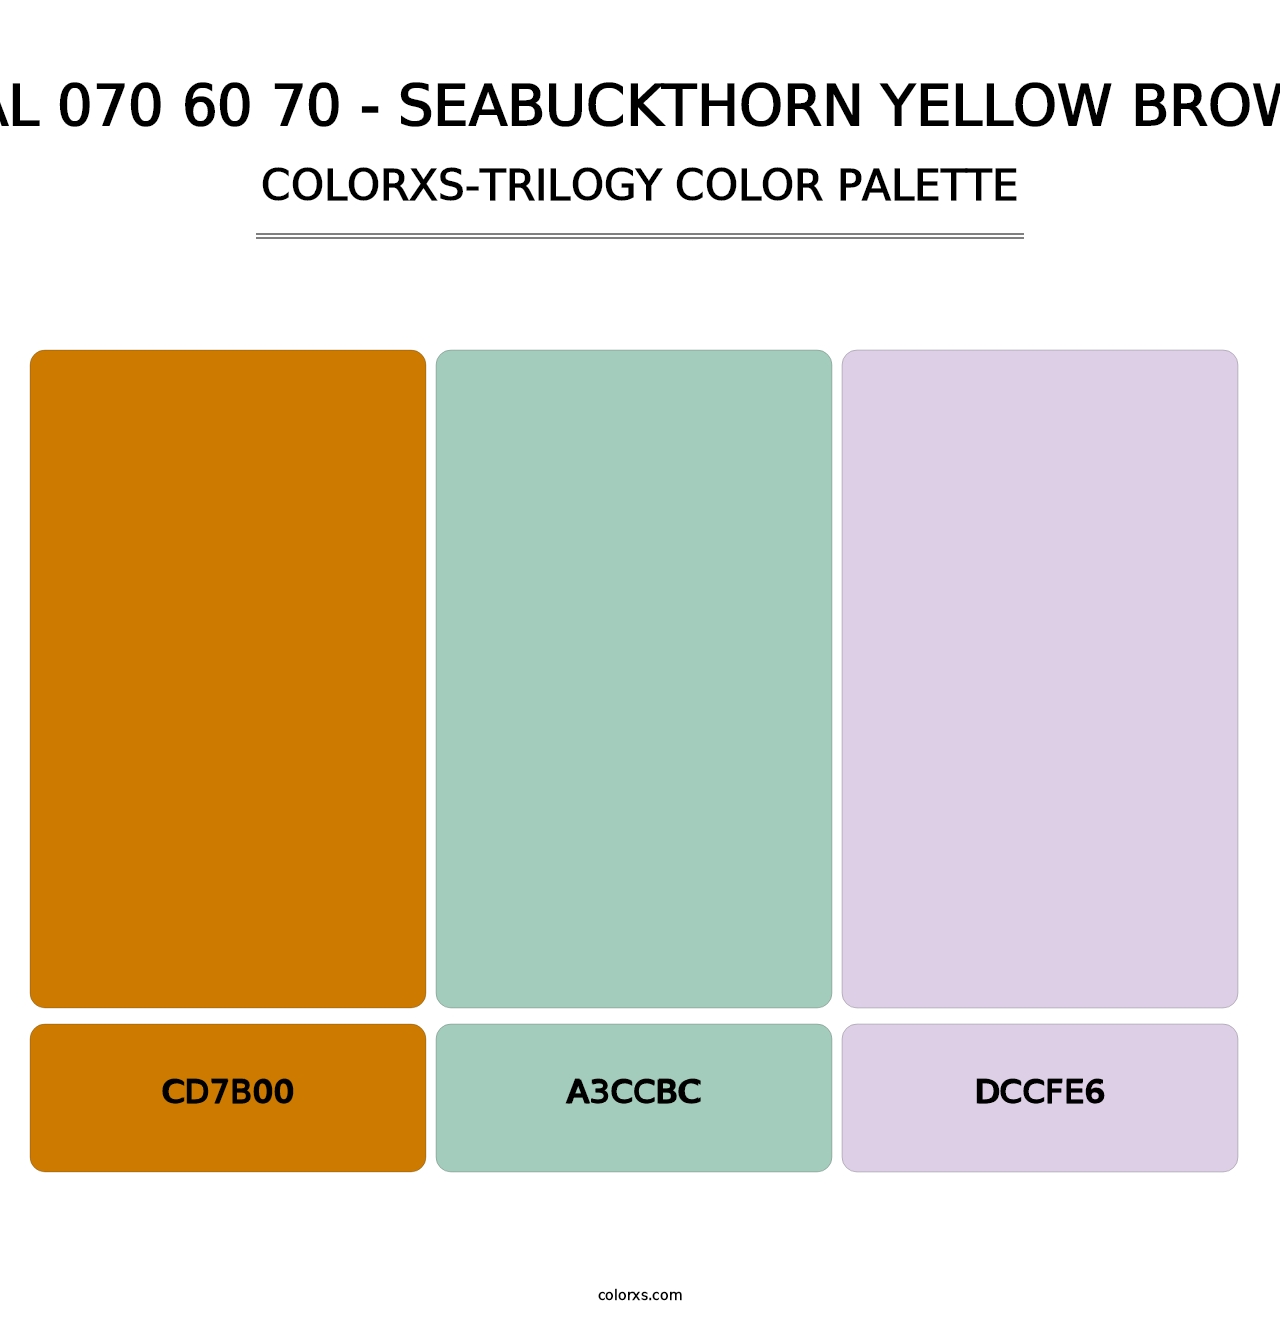 RAL 070 60 70 - Seabuckthorn Yellow Brown - Colorxs Trilogy Palette